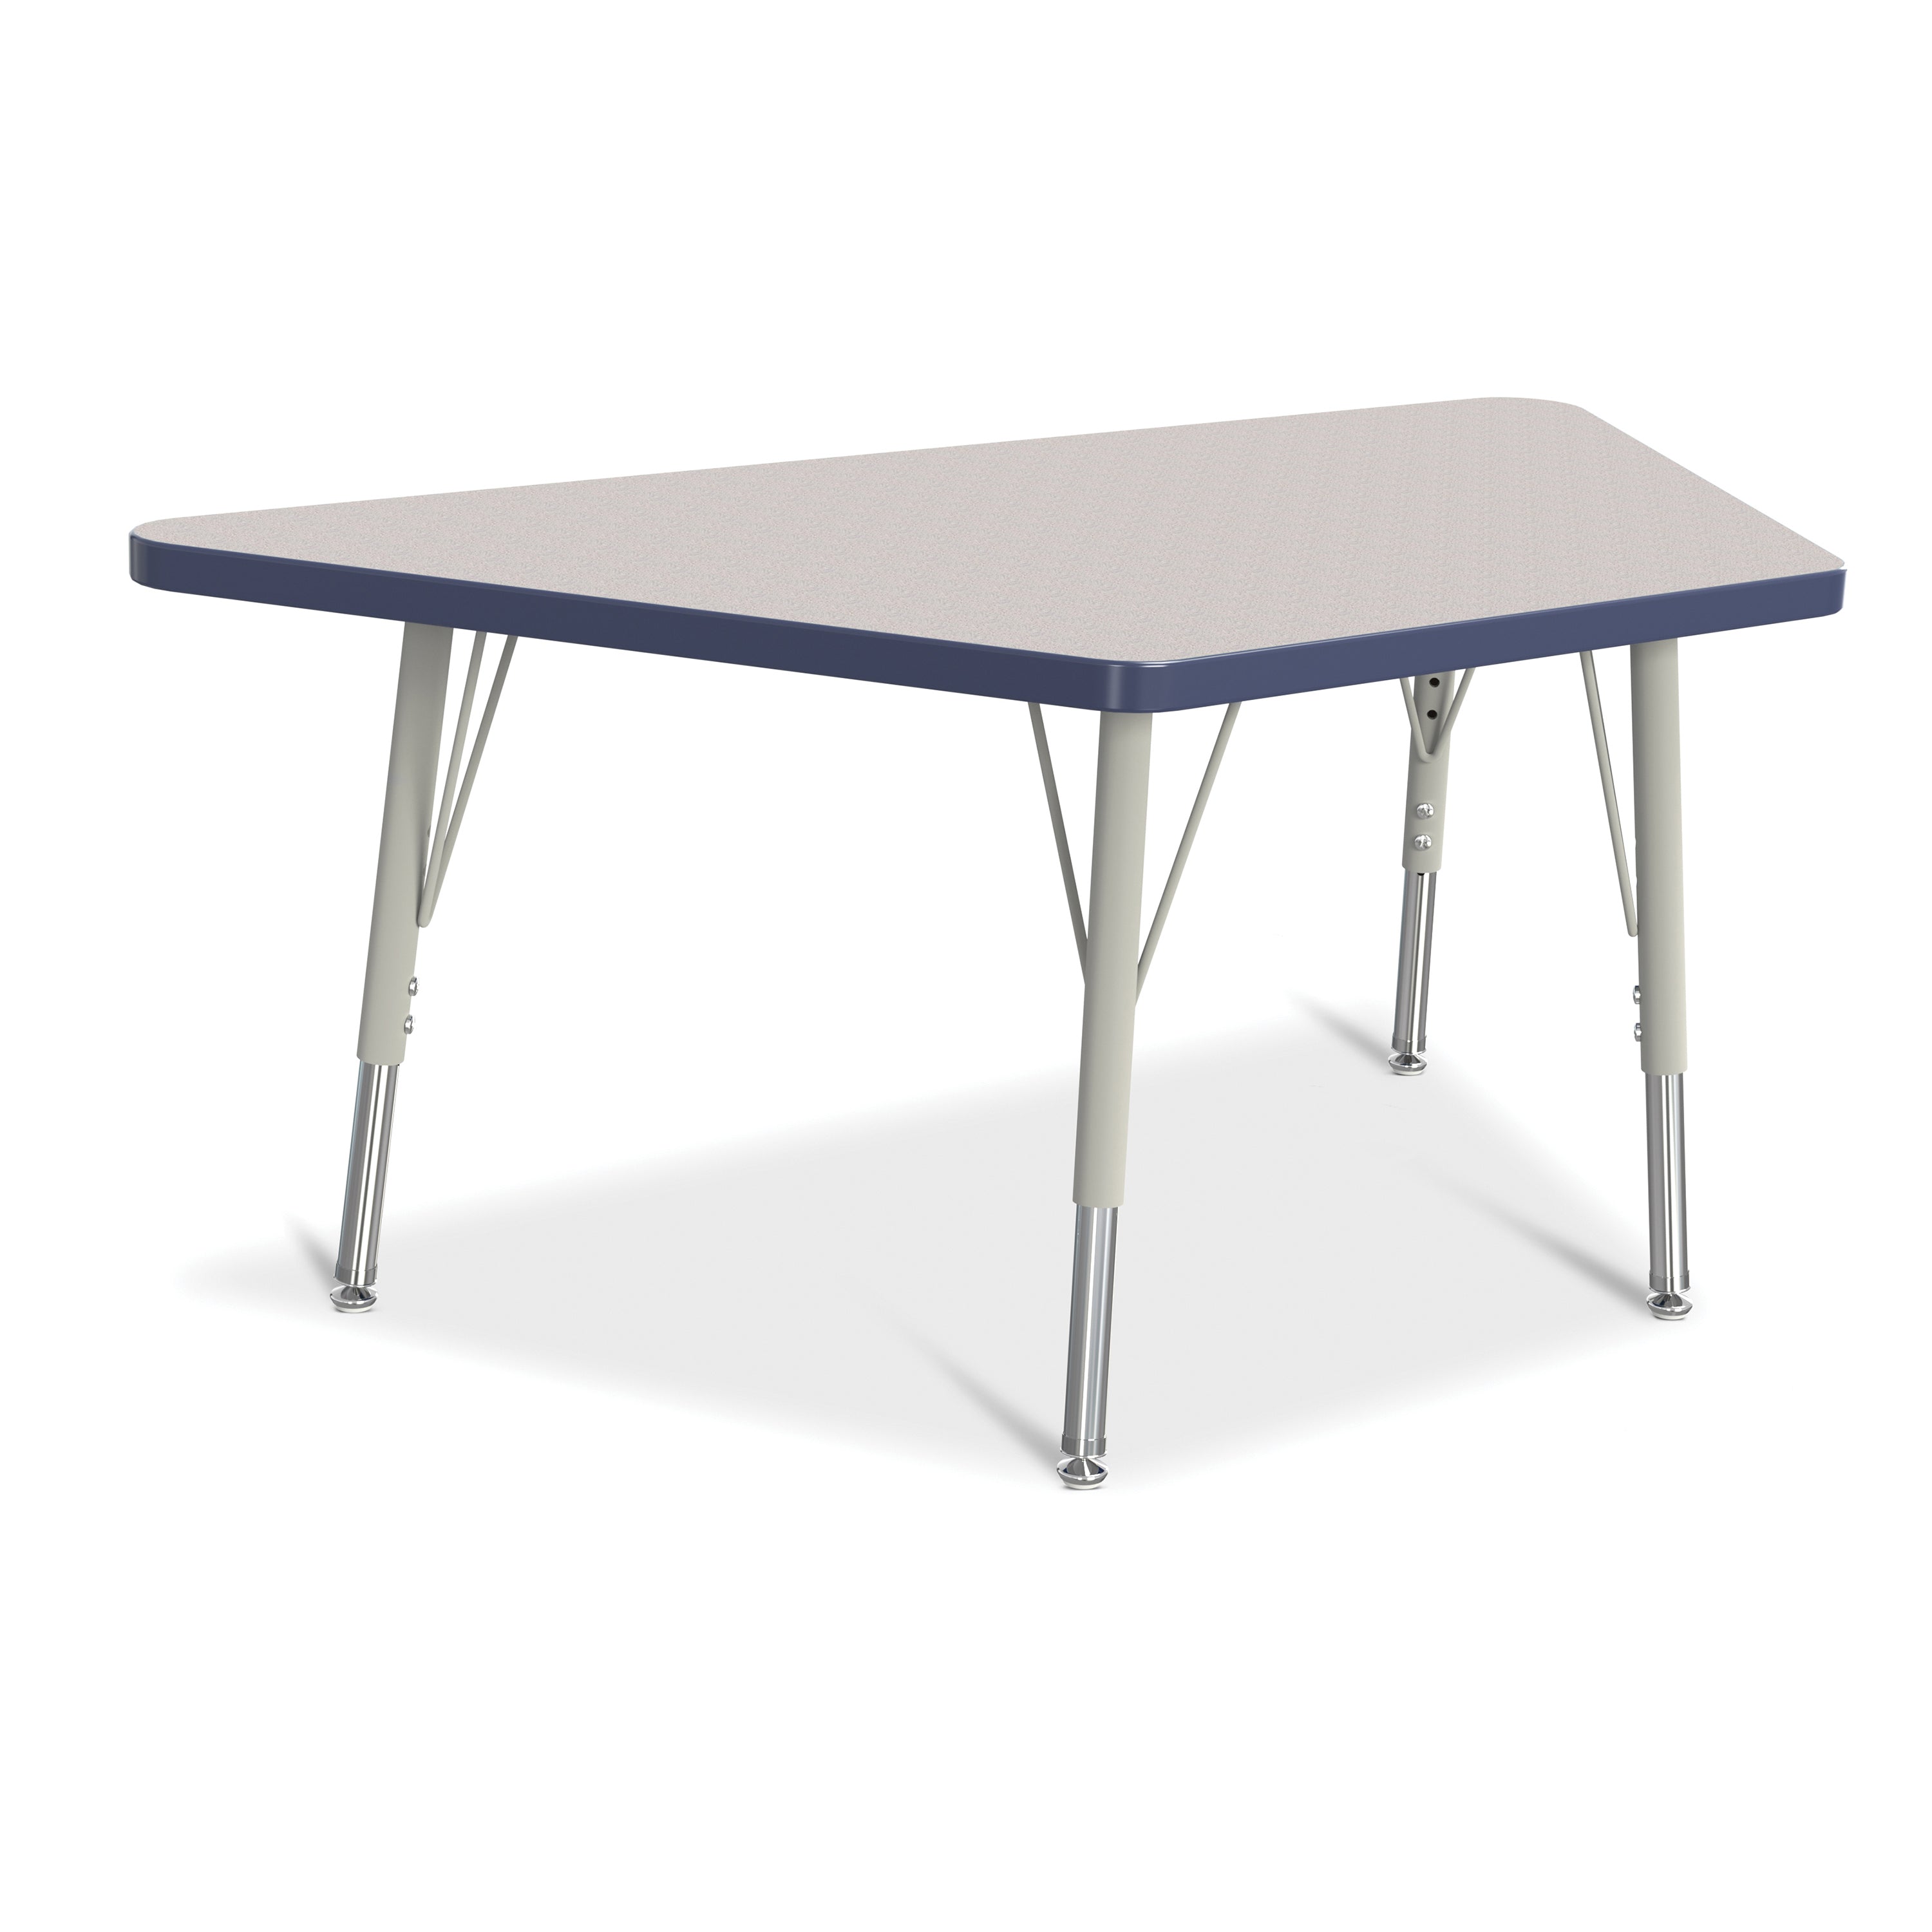 6438JCE112, Berries Trapezoid Activity Tables - 24" X 48", E-height - Freckled Gray/Navy/Gray